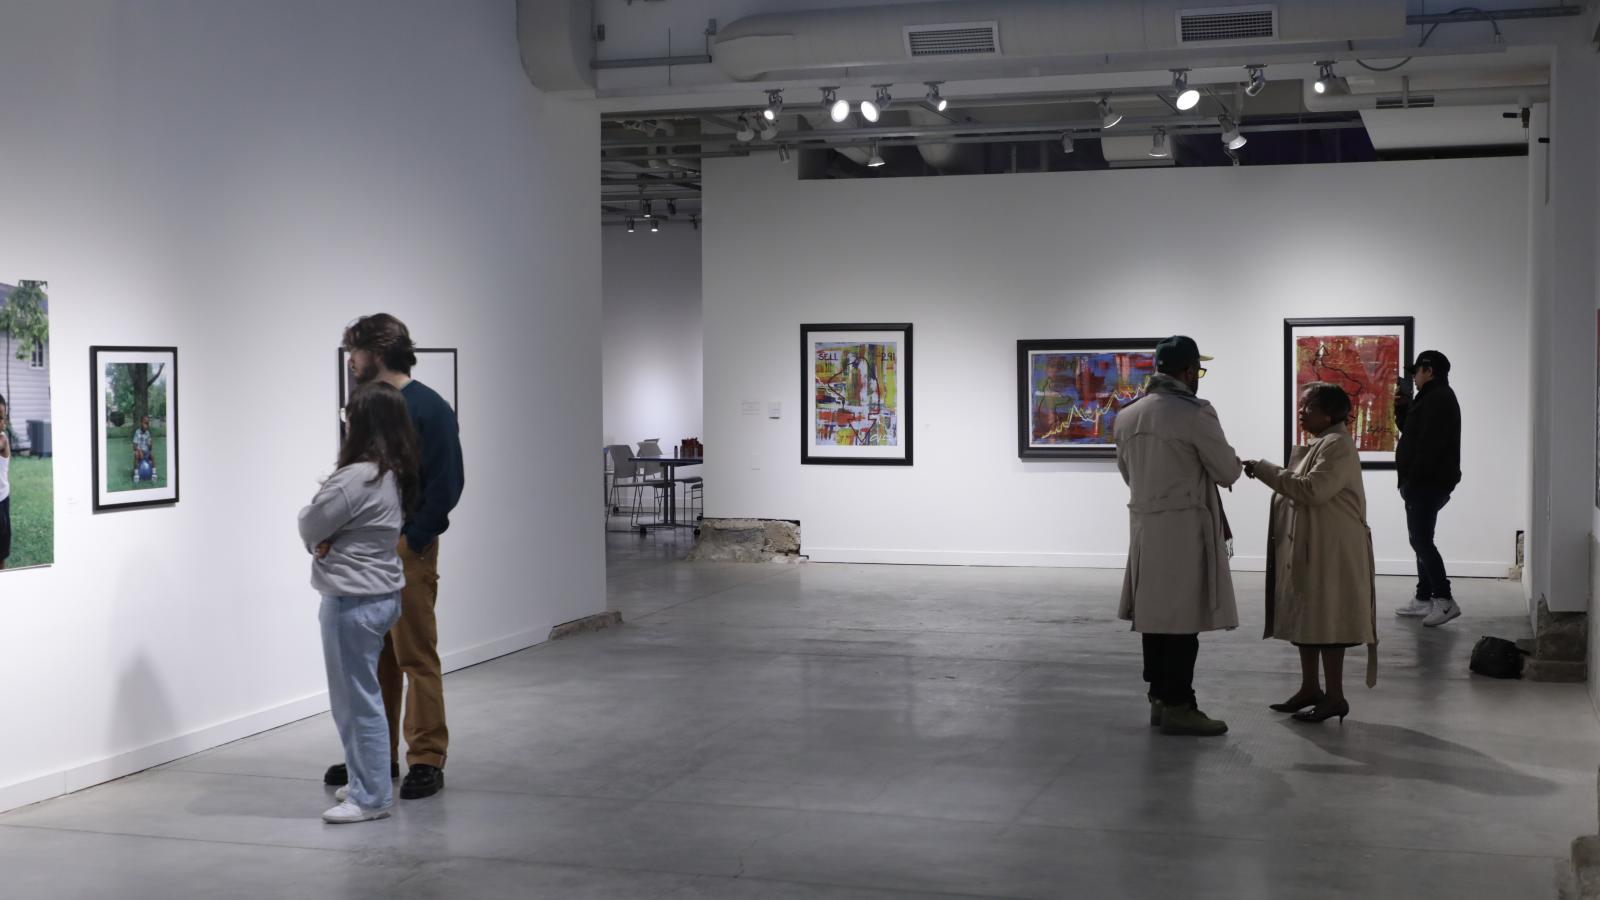 A photo taken in the gallery, three people are admiring artwork and two other people are in conversation.